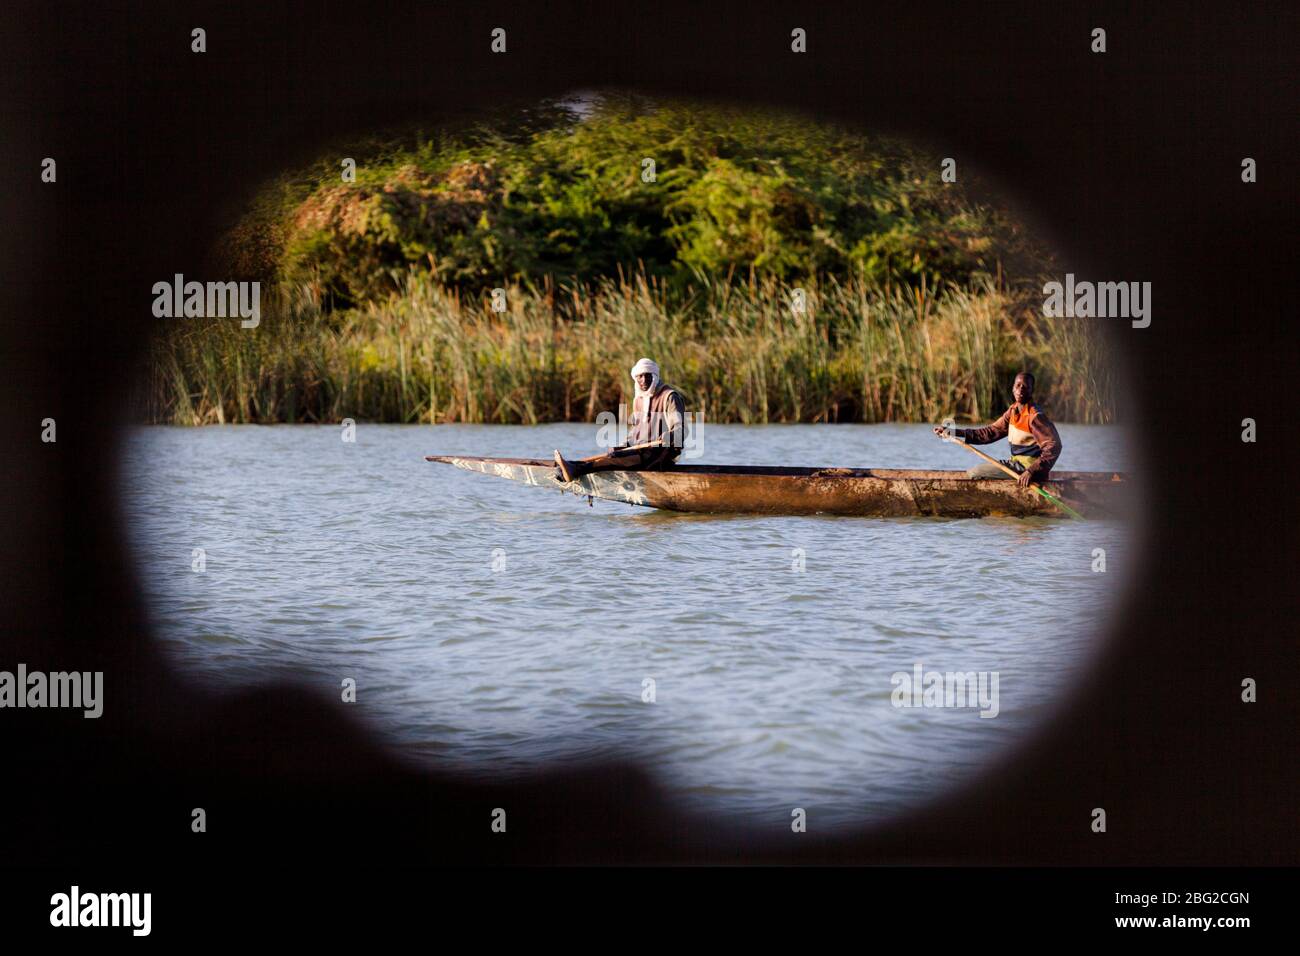 Senegal River locals paddling a pirogue as seen through a porthole on the Bou el Mogdad antique river boat. Stock Photo